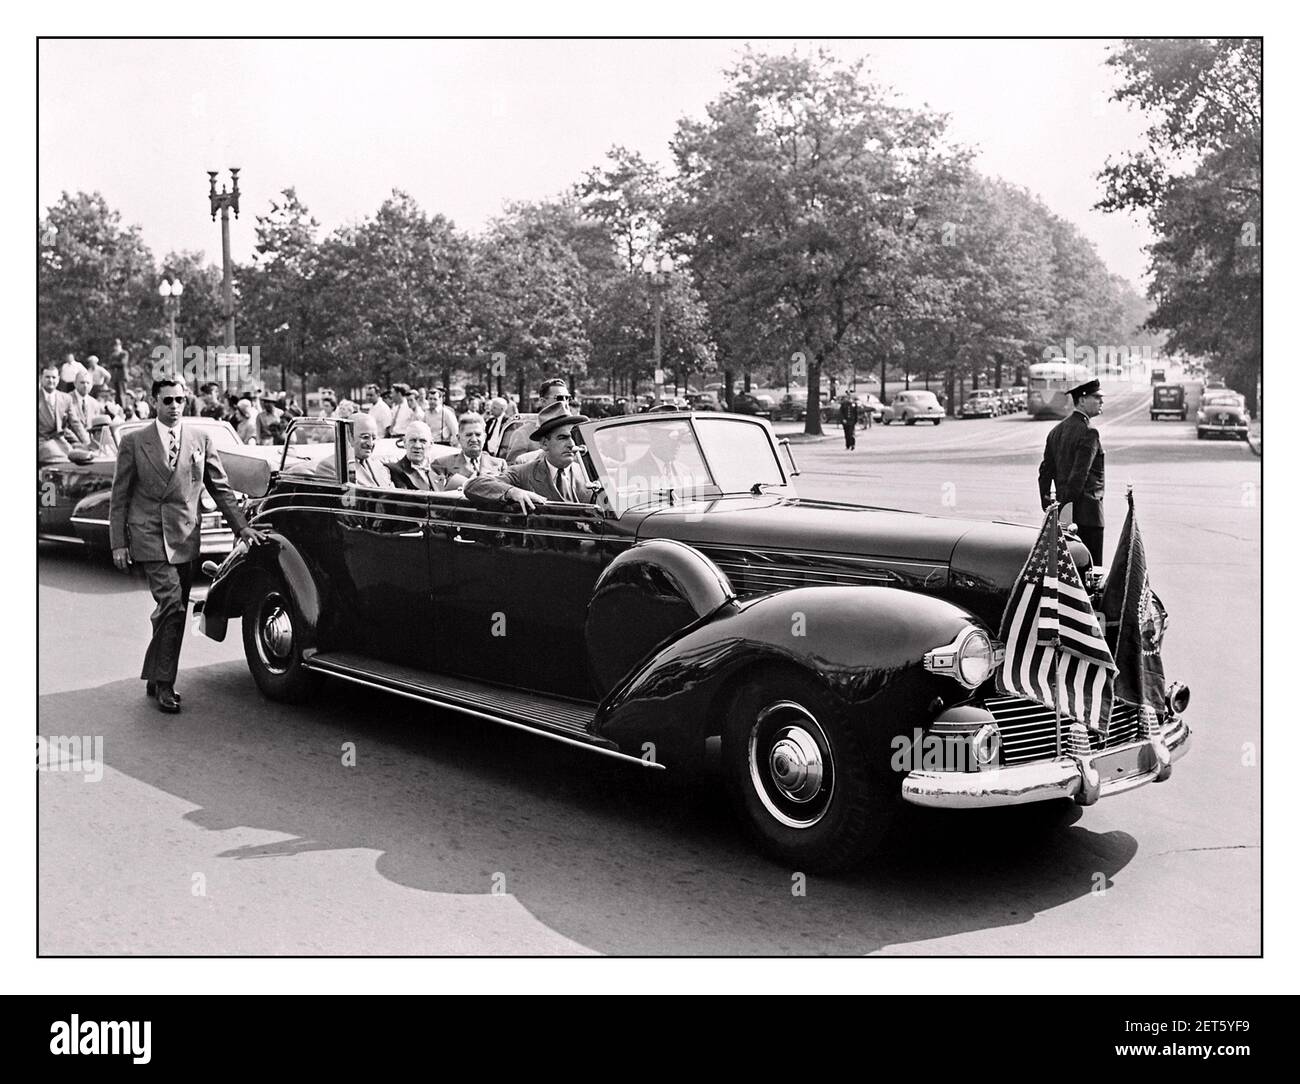 Vintage 1948 Harry Truman Lincoln Model K 'Sunshine Special' Presidential Convertible Limousine '1948 President Harry S. Truman with secret service security detail in and outside the presidential motorcar President Harry S. Truman and Vice President-elect Alben W. Barkley, riding in the back of an open car down a street in Washington, DC; President Truman smiles to the crowd. Truman and Barkley had just returned to Washington after winning the election of 1948. Stock Photo